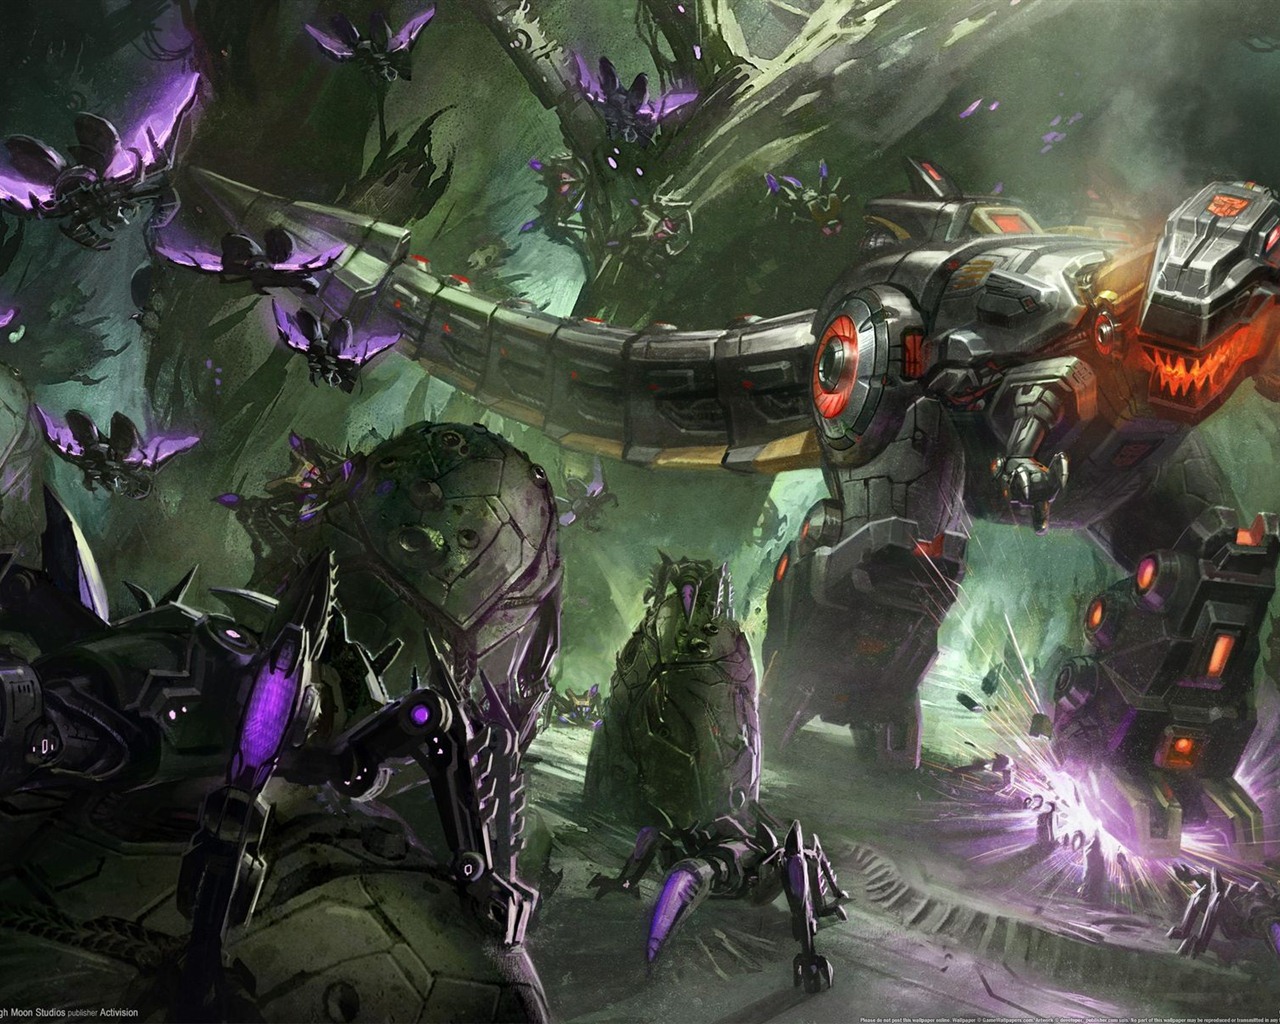 Transformers: Fall of Cybertron HD wallpapers #3 - 1280x1024